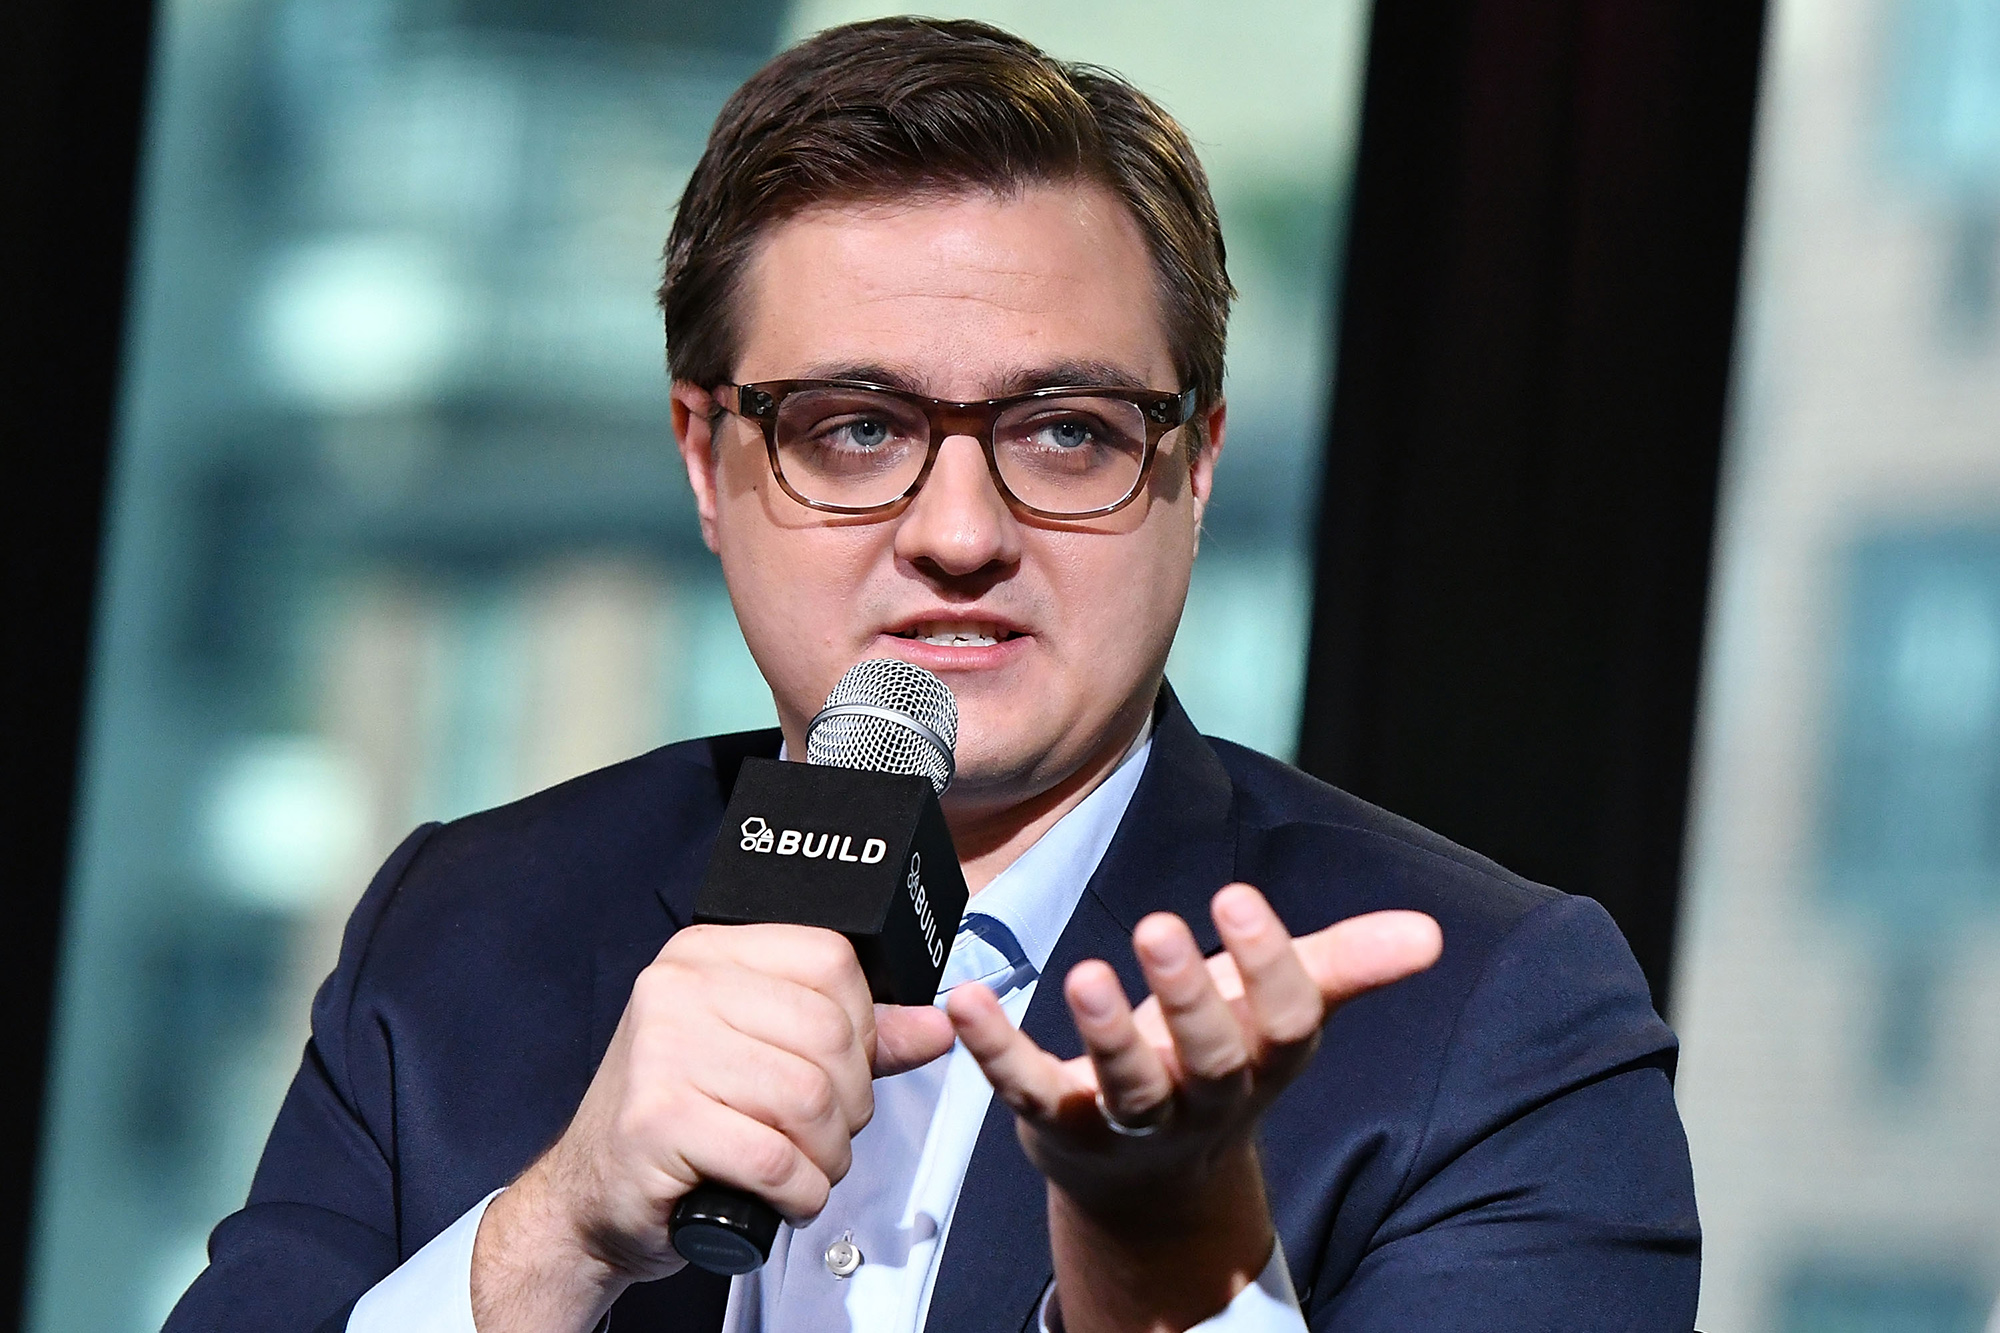 MSNBC host Chris Hayes breaks with network to side with Ronan Farrow